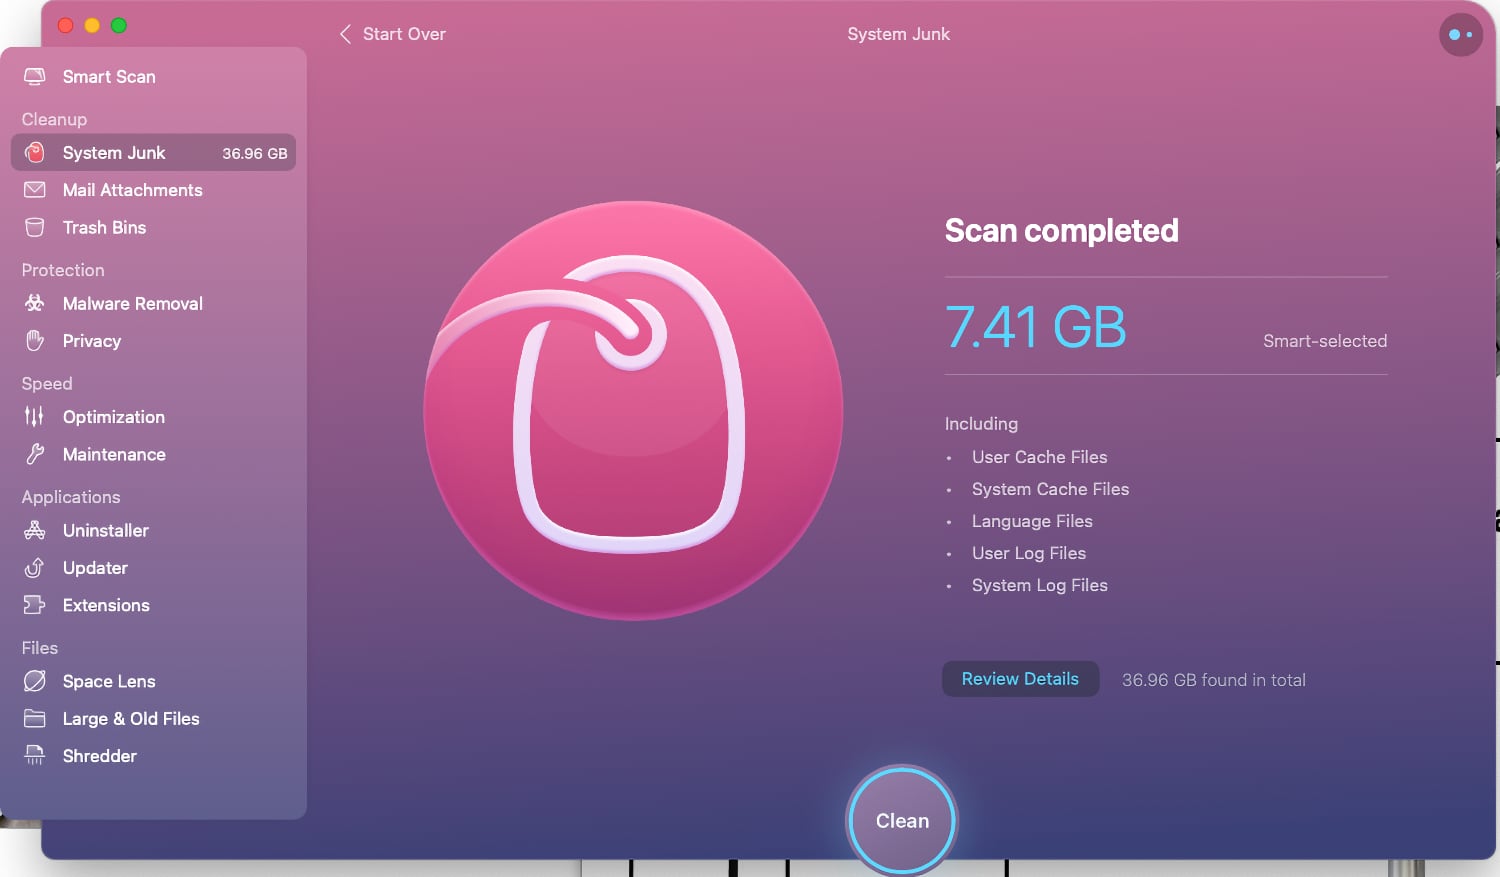 cleanmymac x review 2019